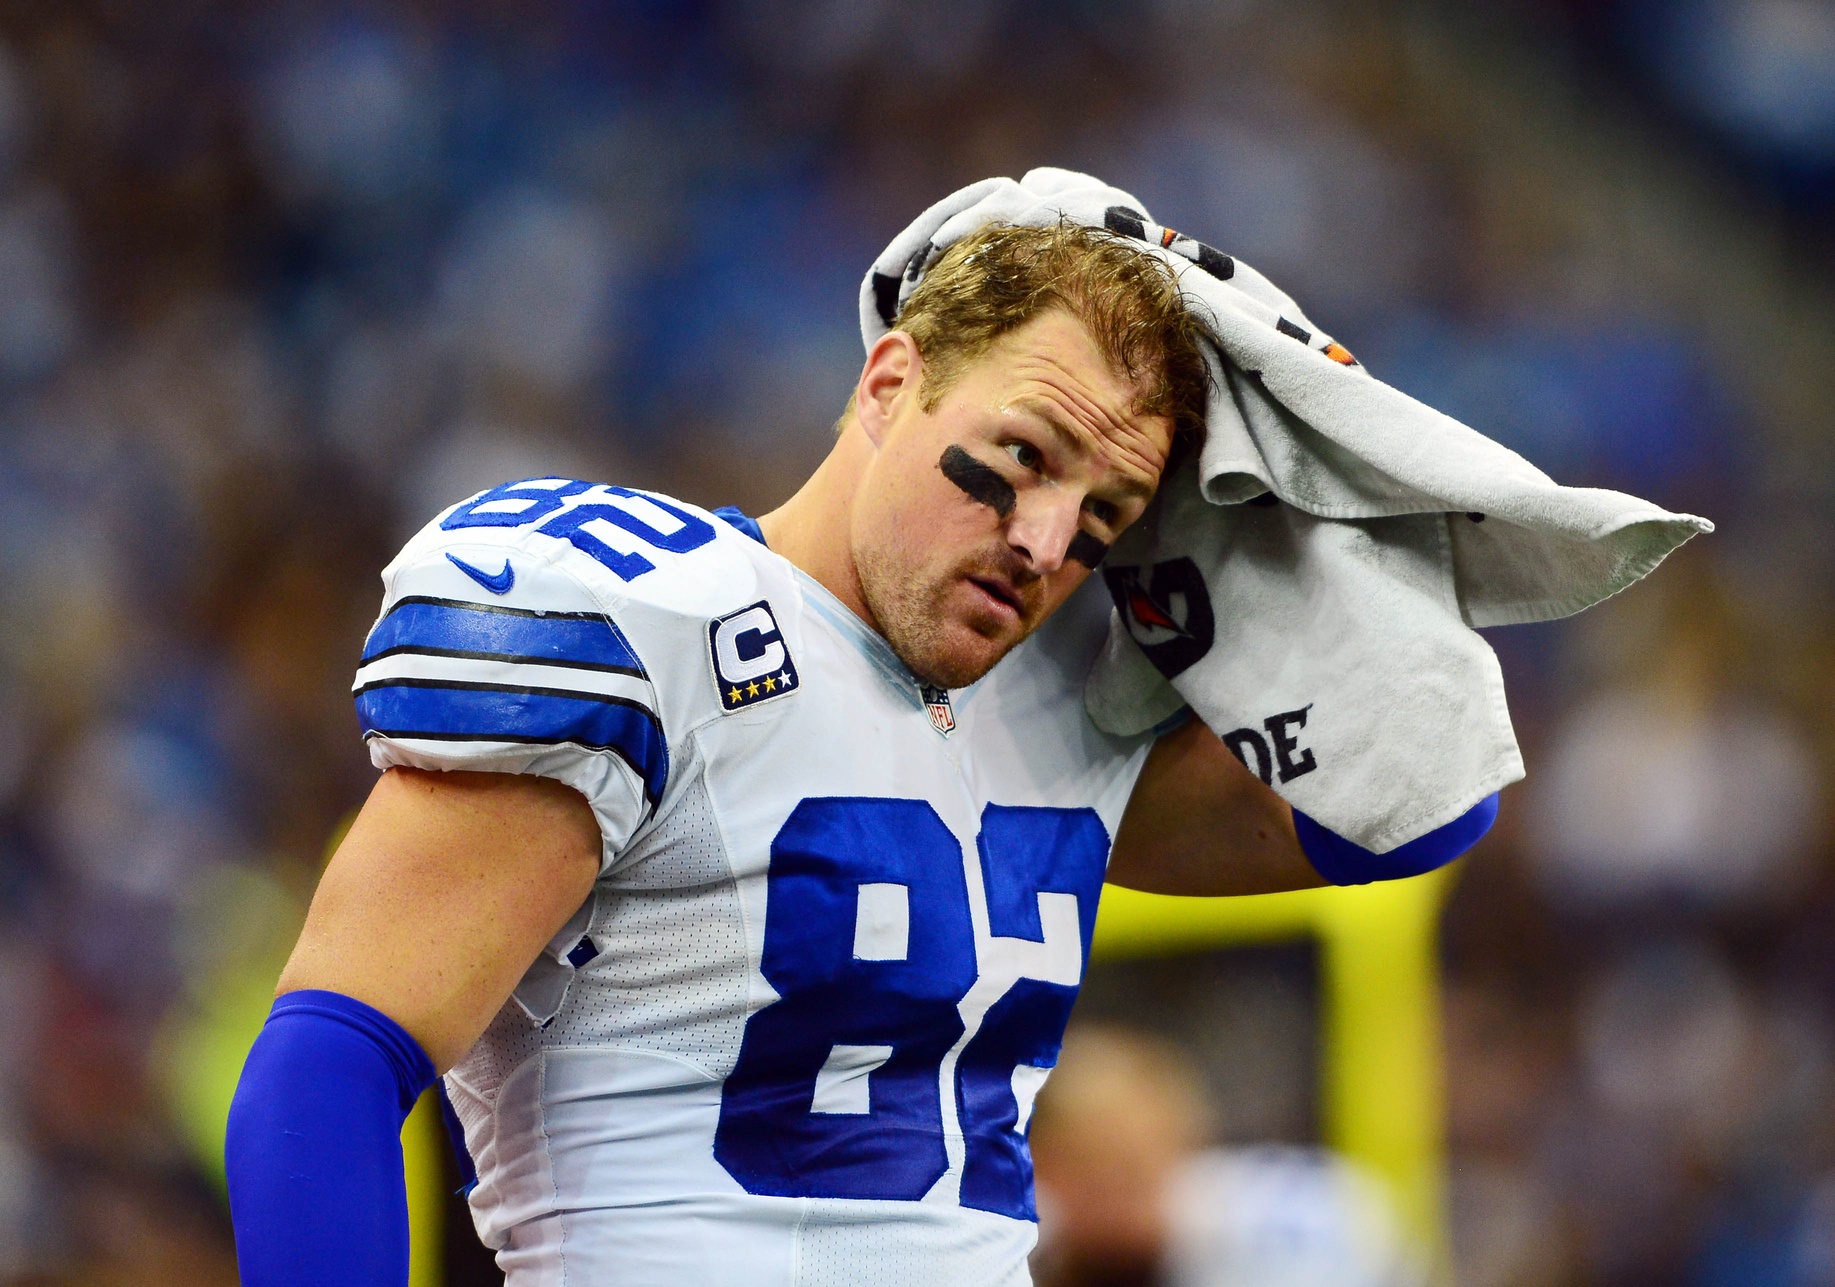 Jason Witten Getting Comfy In His Bunny Slippers1835 x 1287